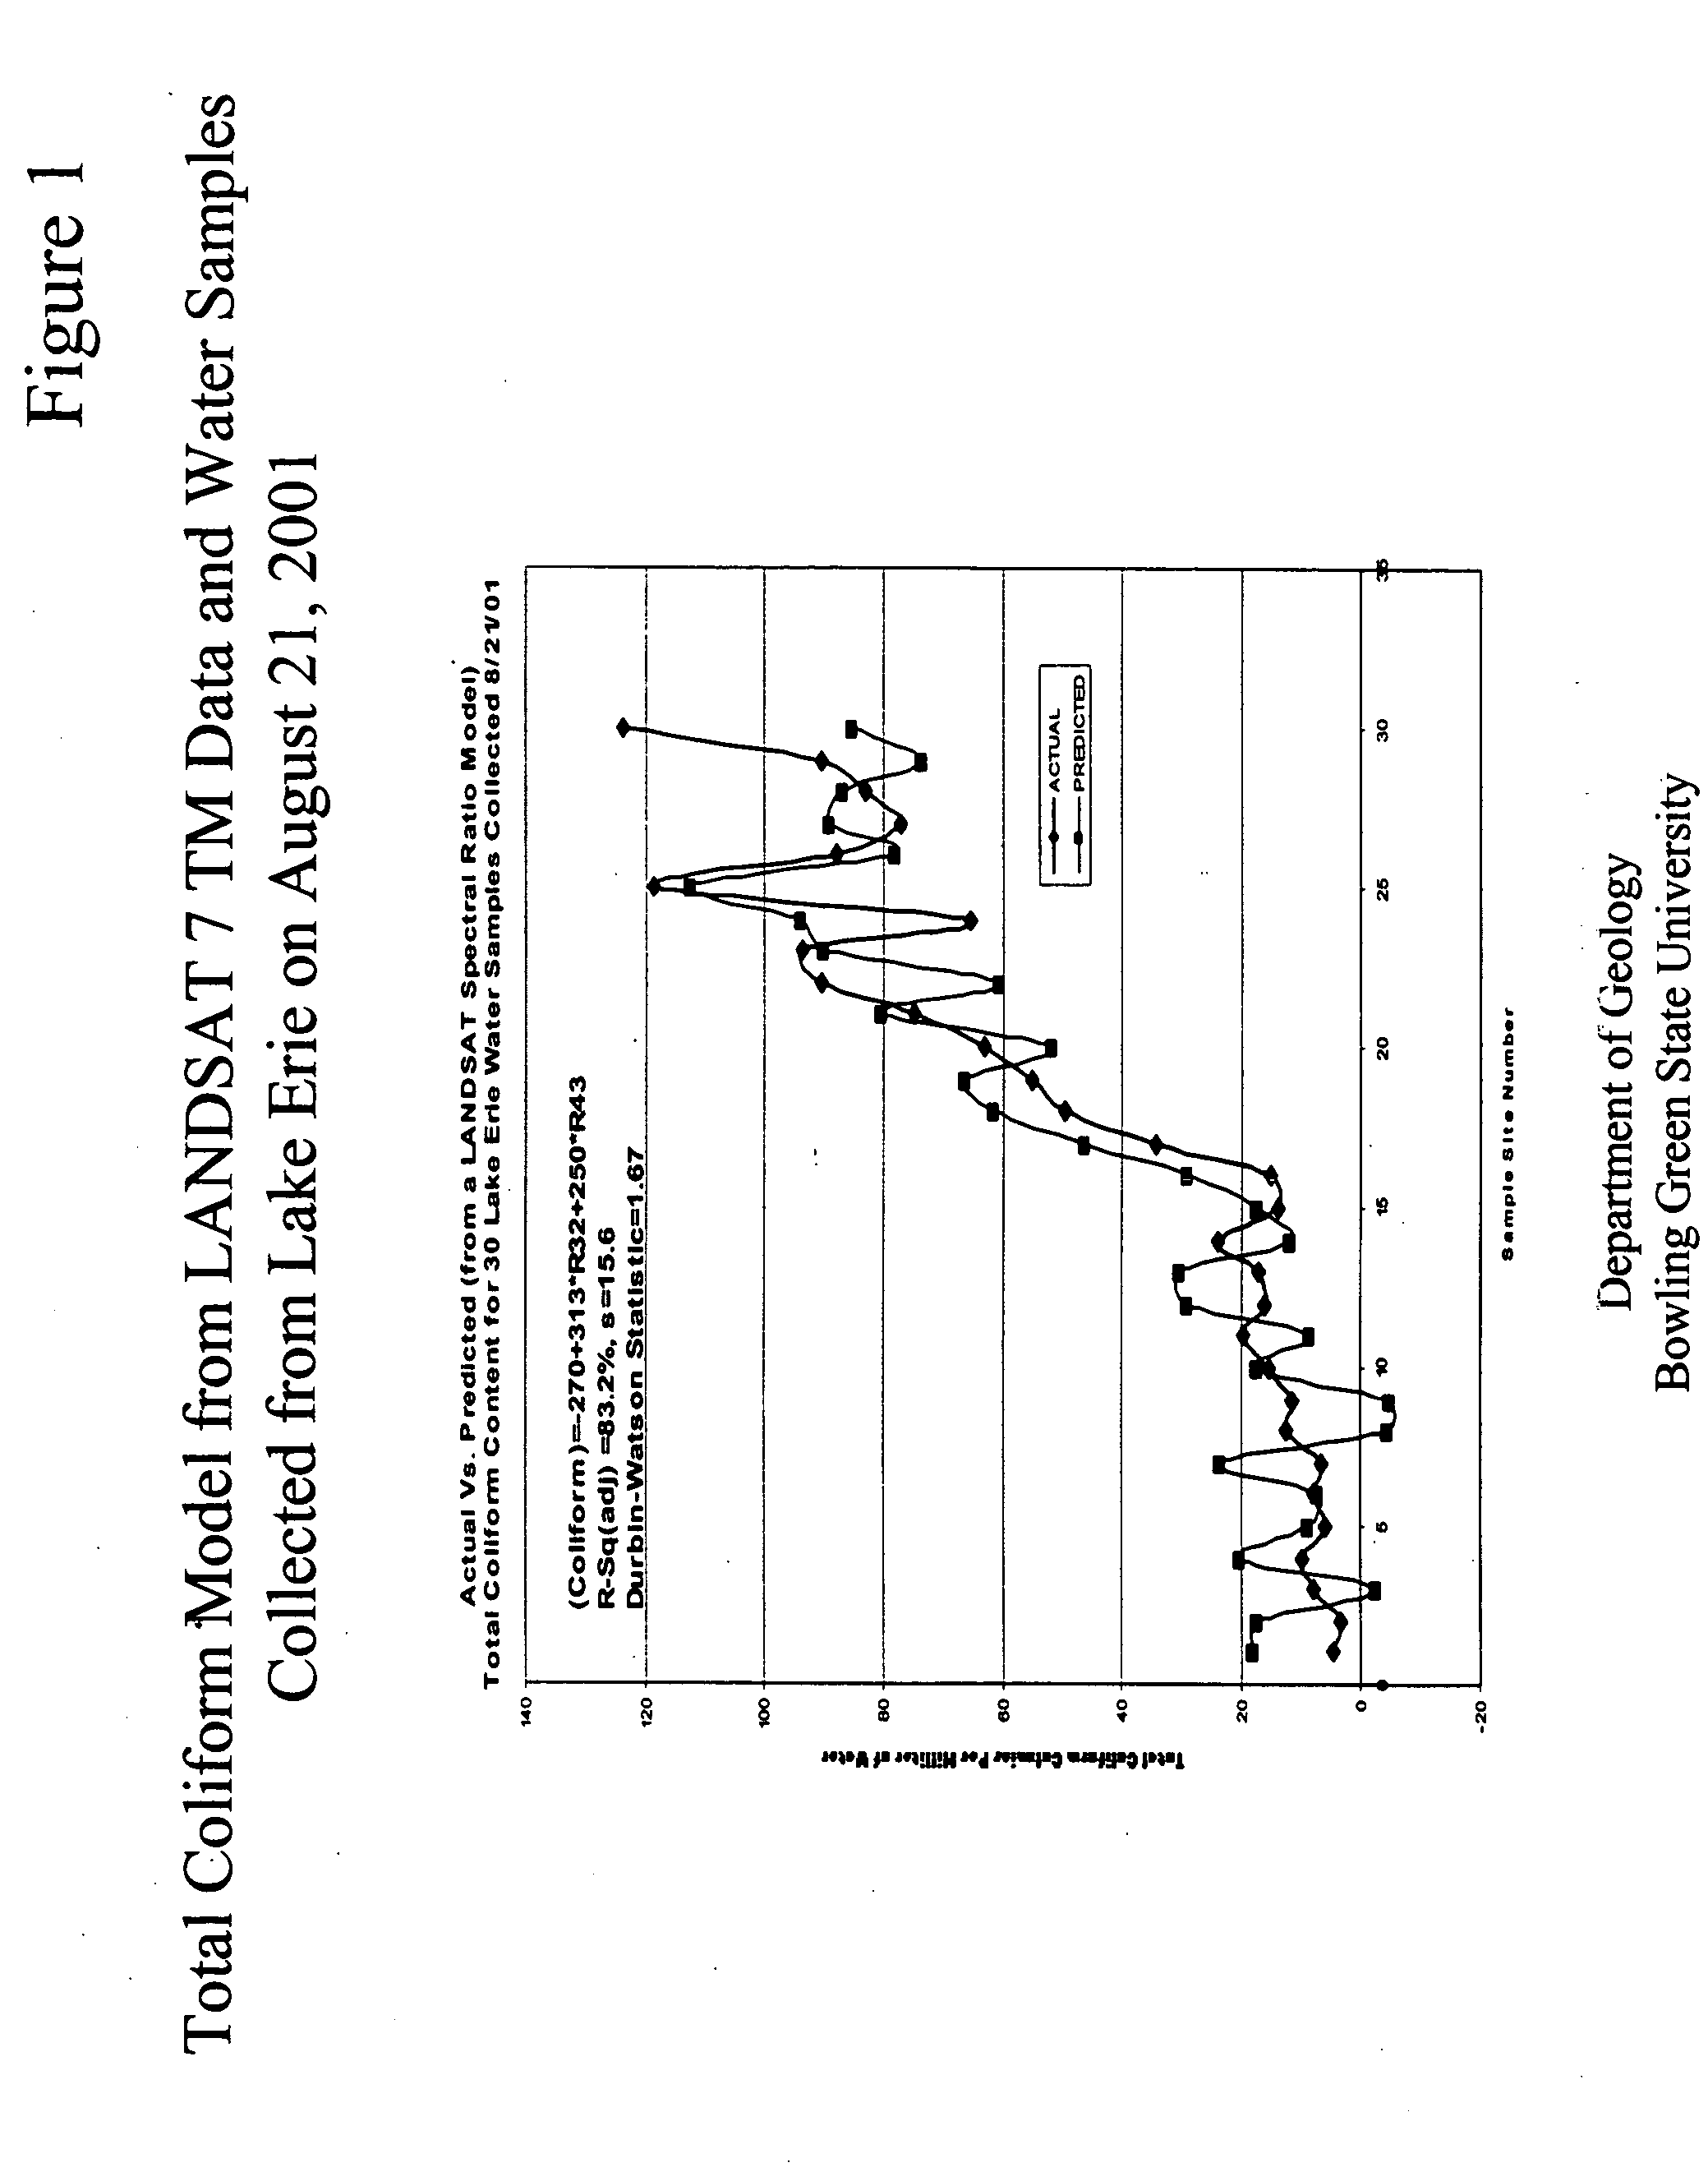 Method and apparatus for detecting coliform bacteria from reflected light